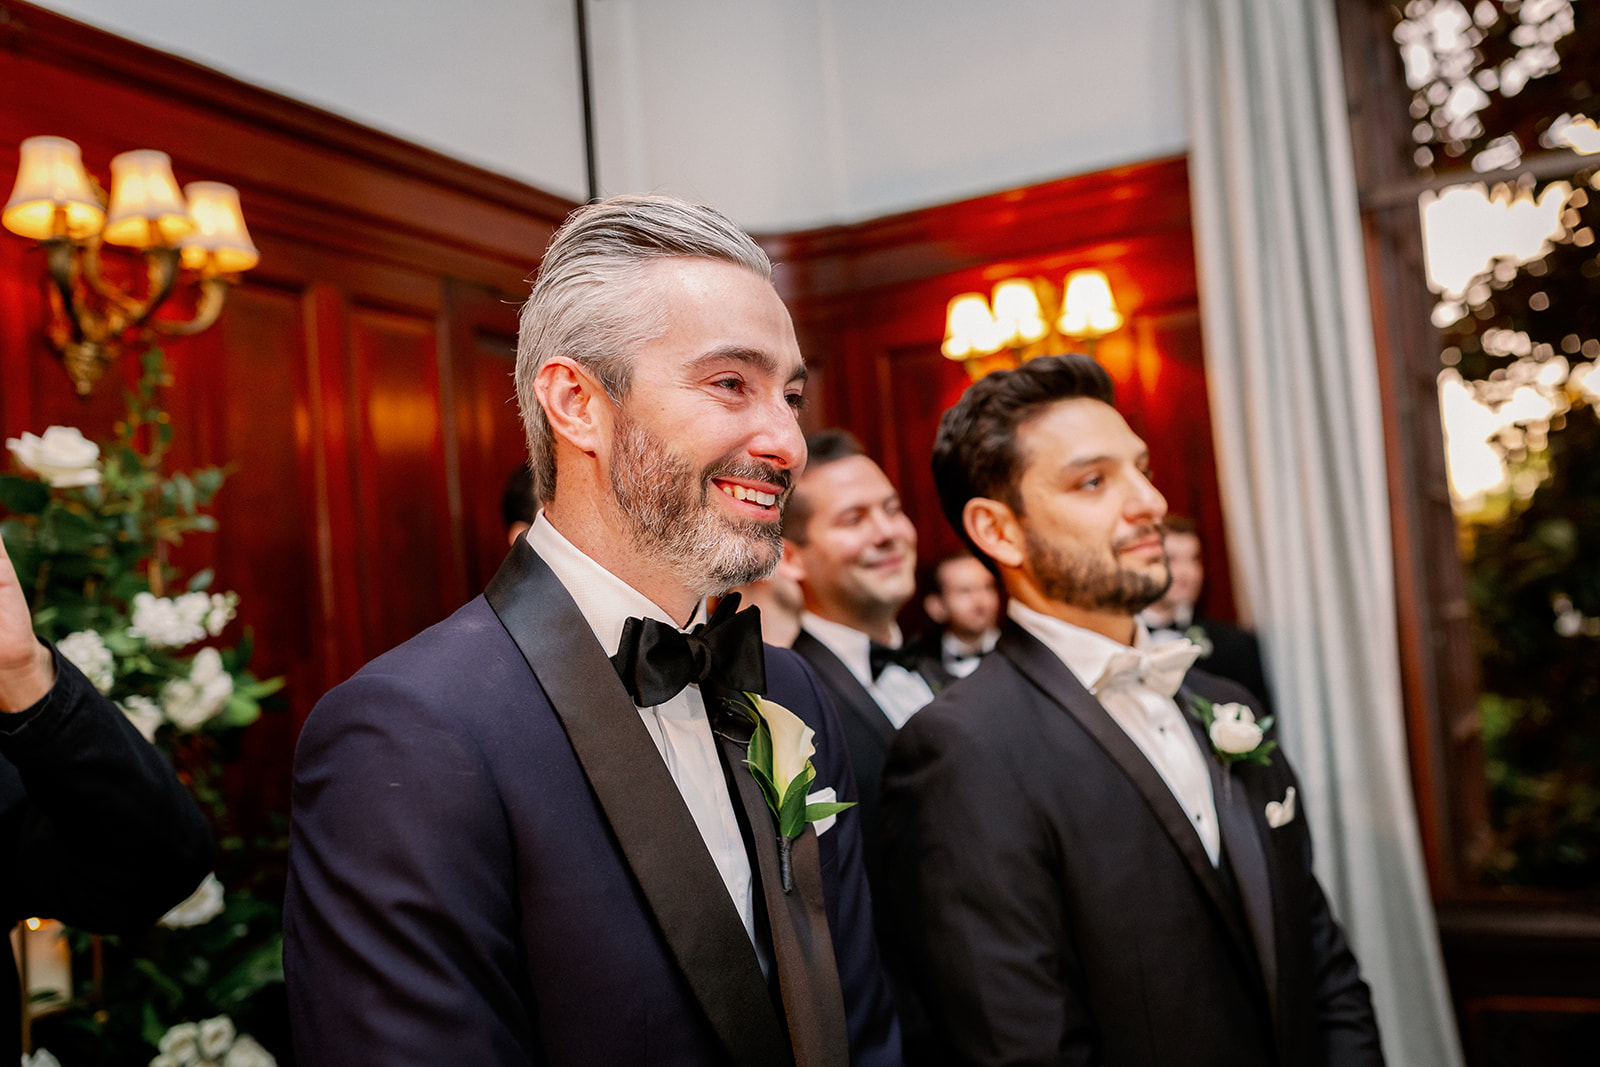 Groom's first look reaction seeing his bride walk down the aisle.